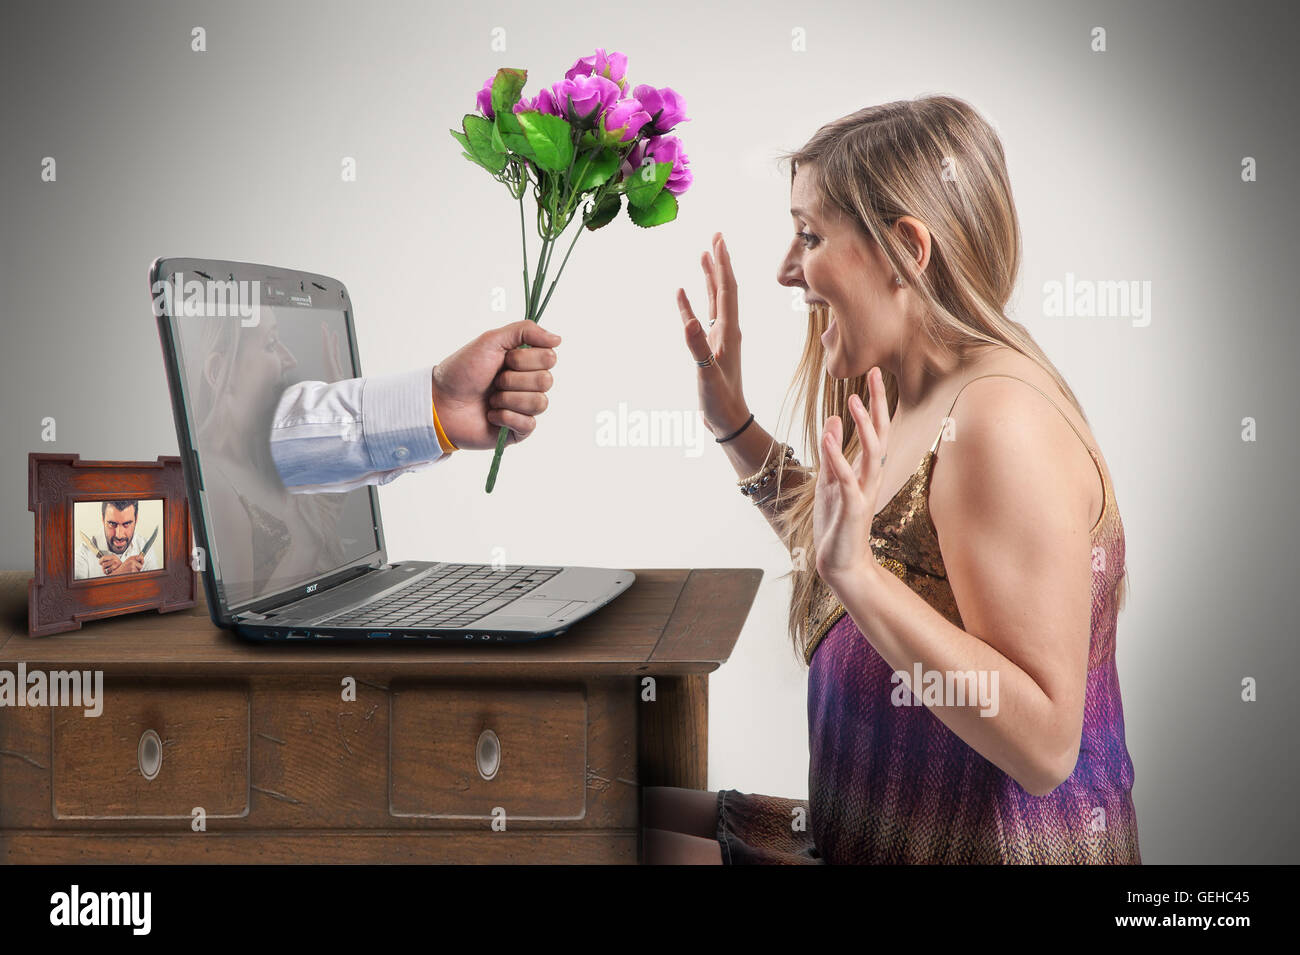 Woman is surprised when a hand holding a bouquet of flowers sticks out the  monitor of laptop she is using Stock Photo - Alamy